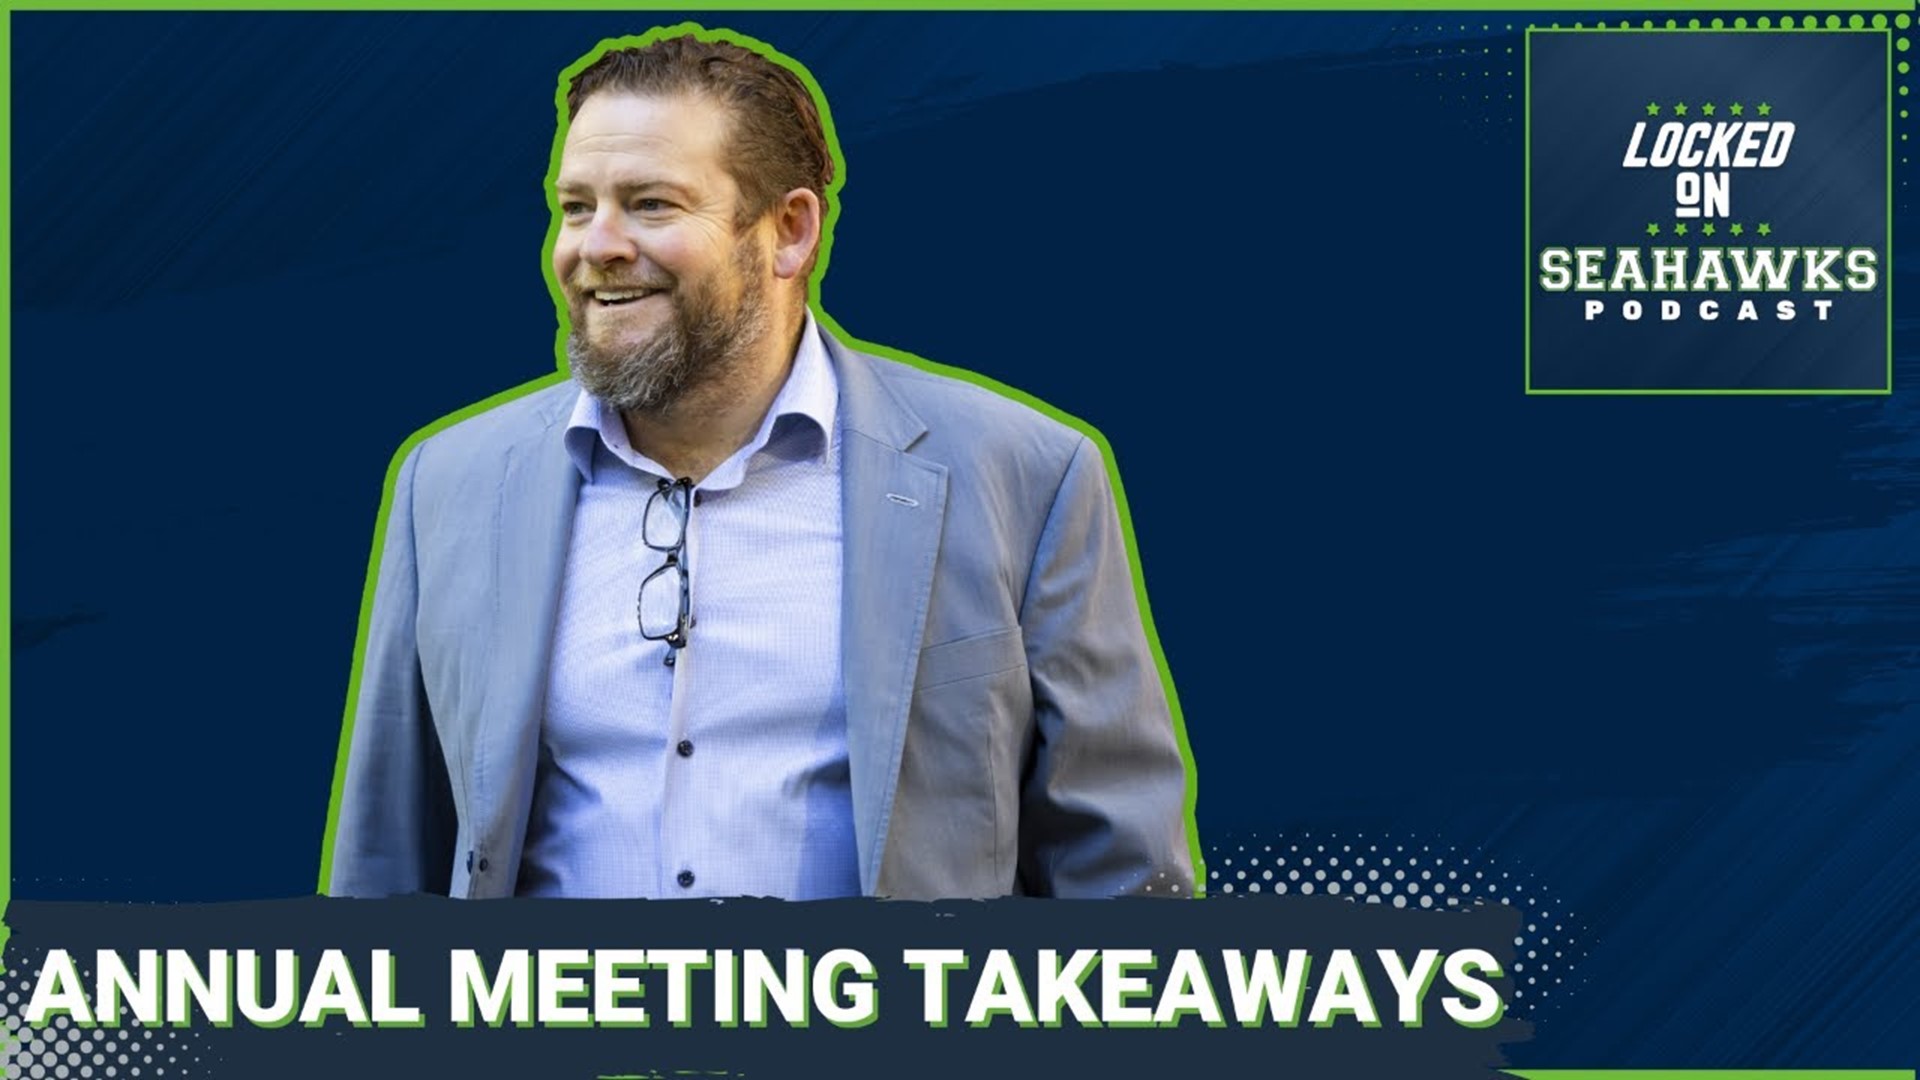 Capping off a busy week in Orlando at the NFL annual meetings, Seahawks general manager John Schneider met with the media and touched on a number of topics